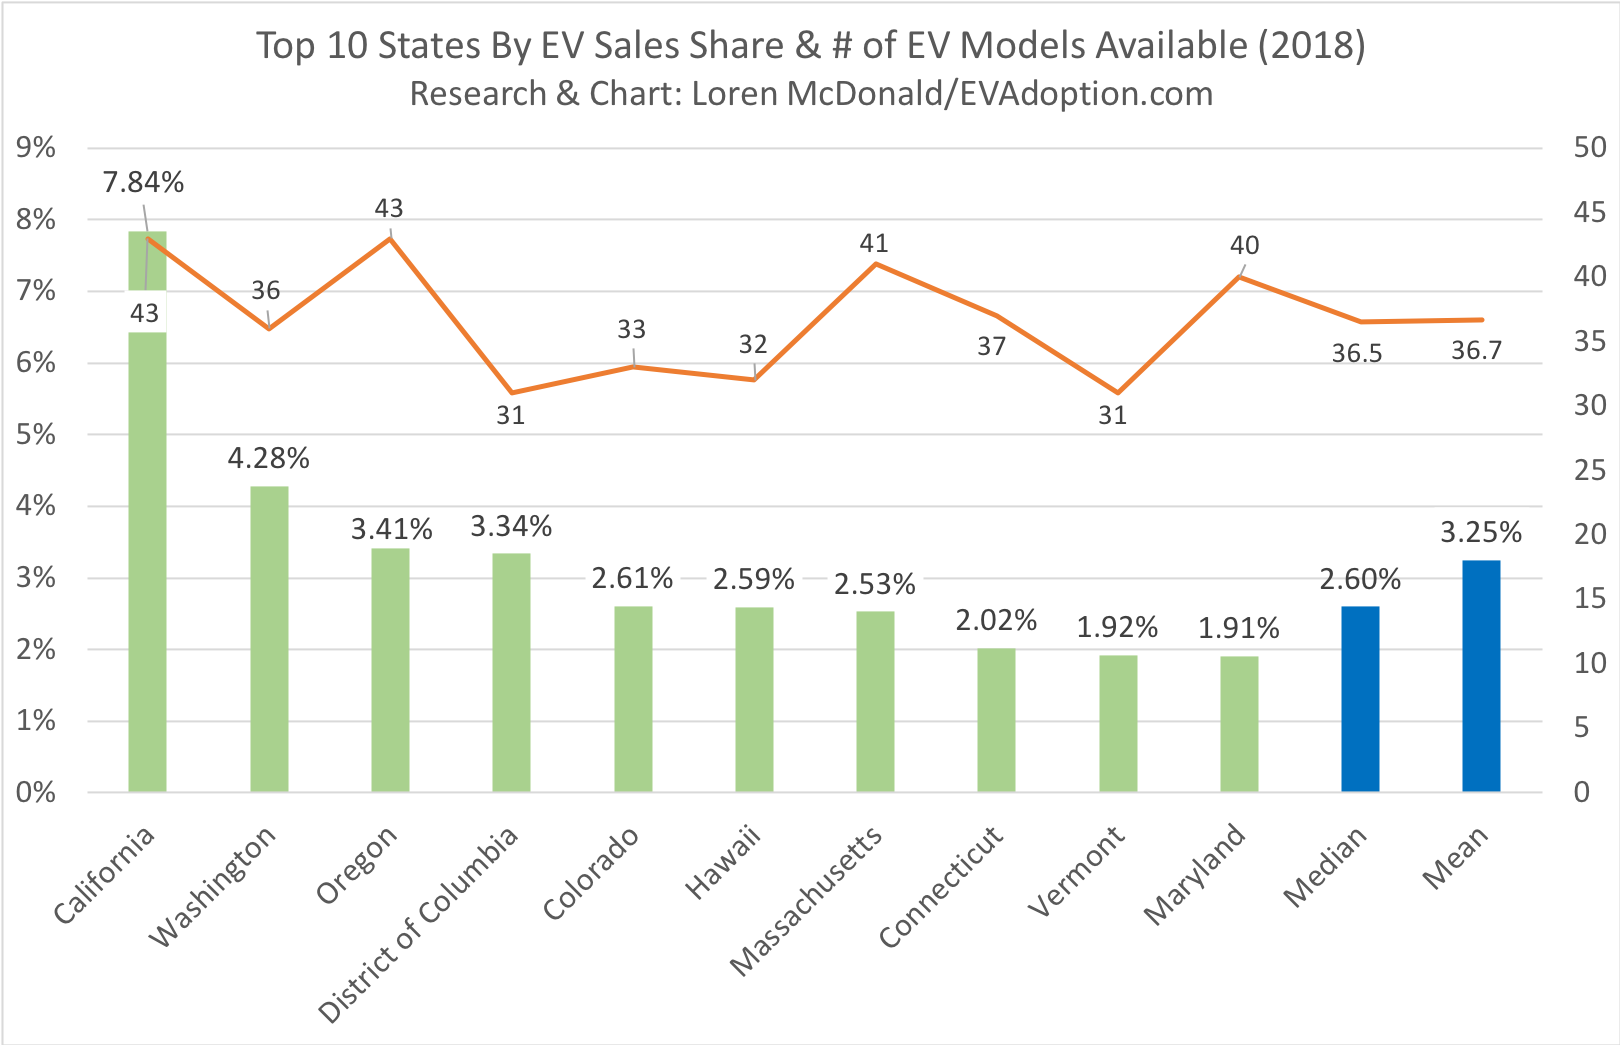 Top 10 States By EV Sales Share & # of EV Models Available-2018